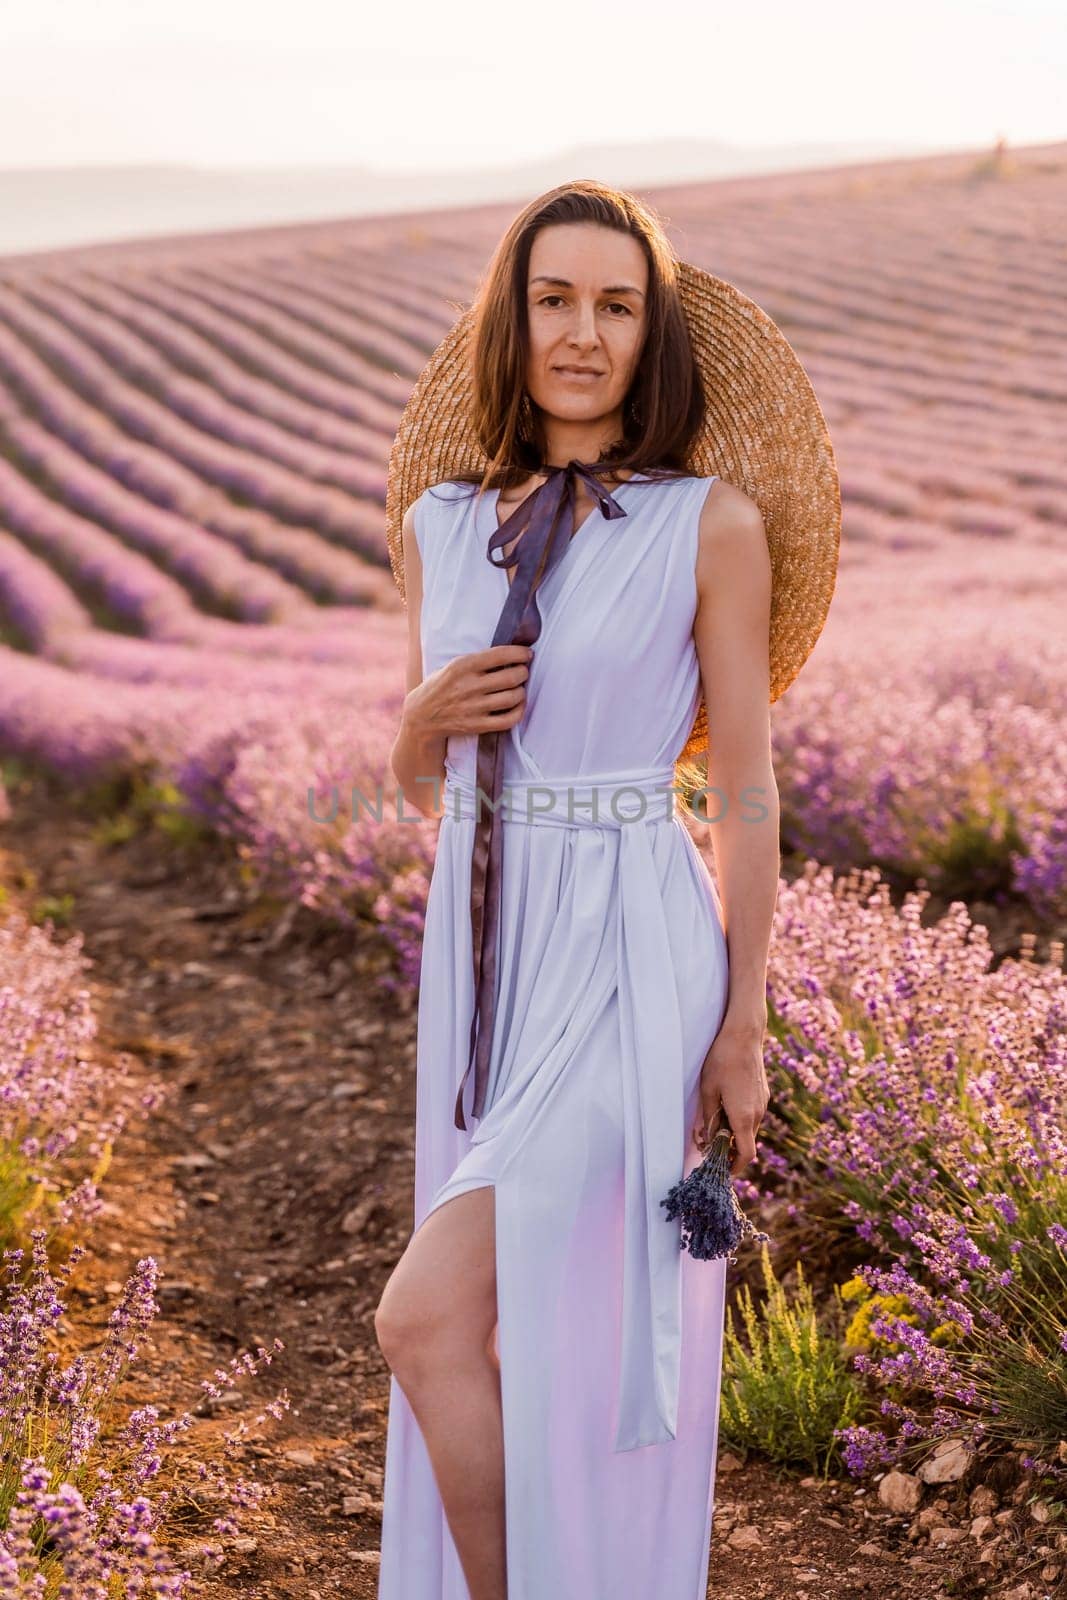 Woman lavender field sunset. Romantic woman walks through the lavender fields. illuminated by sunset sunlight. She is dressed in a white dress with a hat